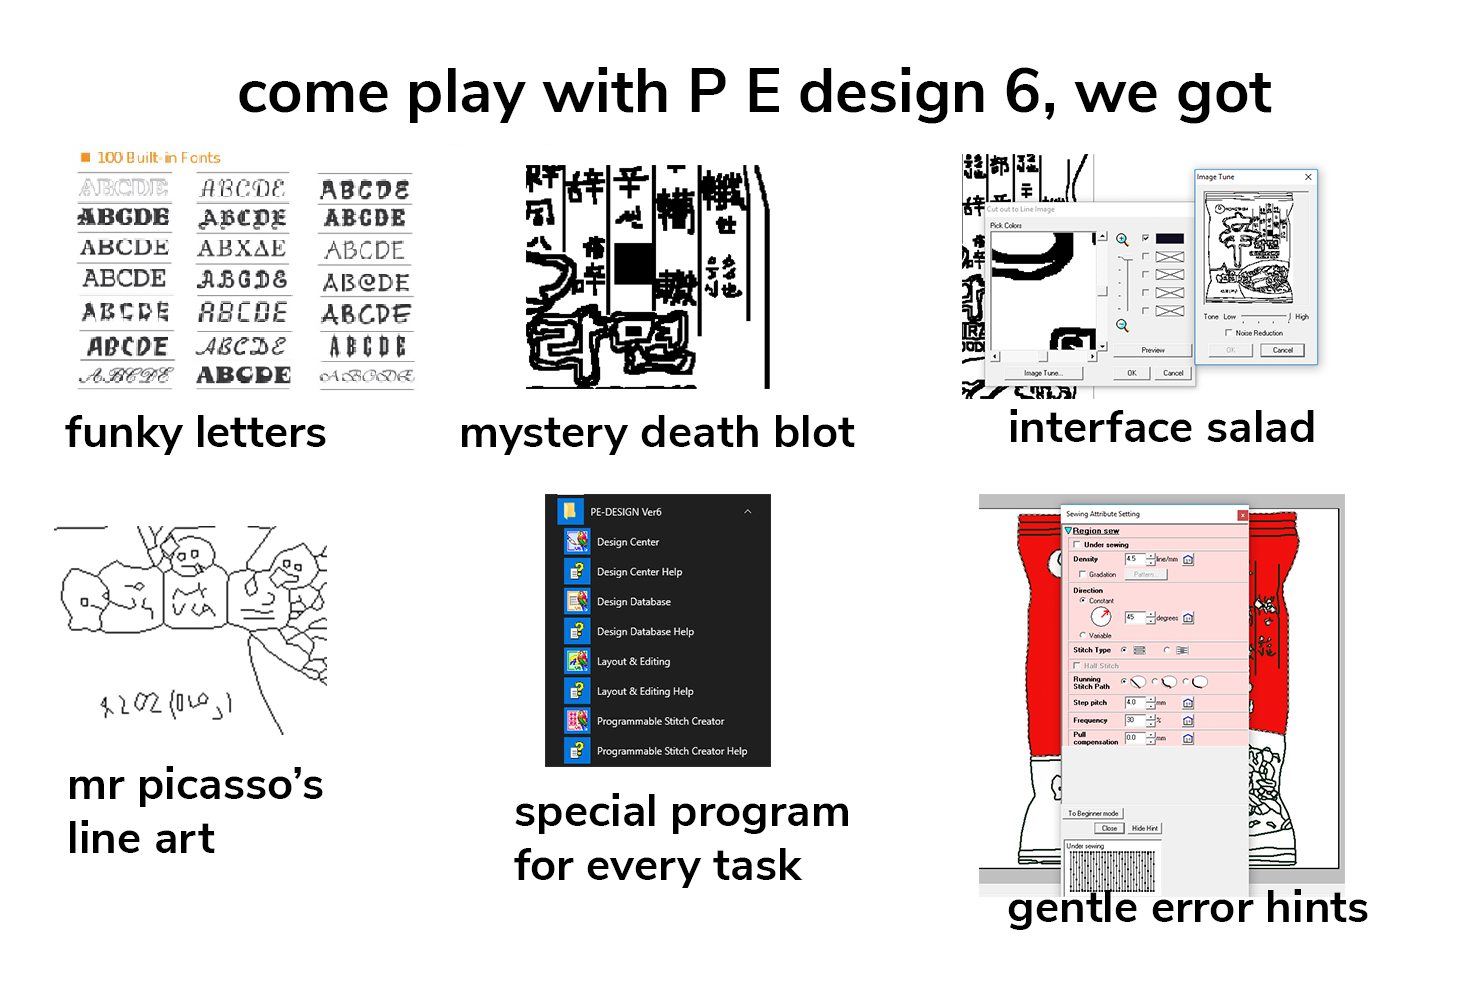 a meme describing 6 different negative qualities of brother's PE design 6 software: bad typefaces, mystery blobs, too many dialog boxes, bad vectorisation, too many separate programs, bad error messages